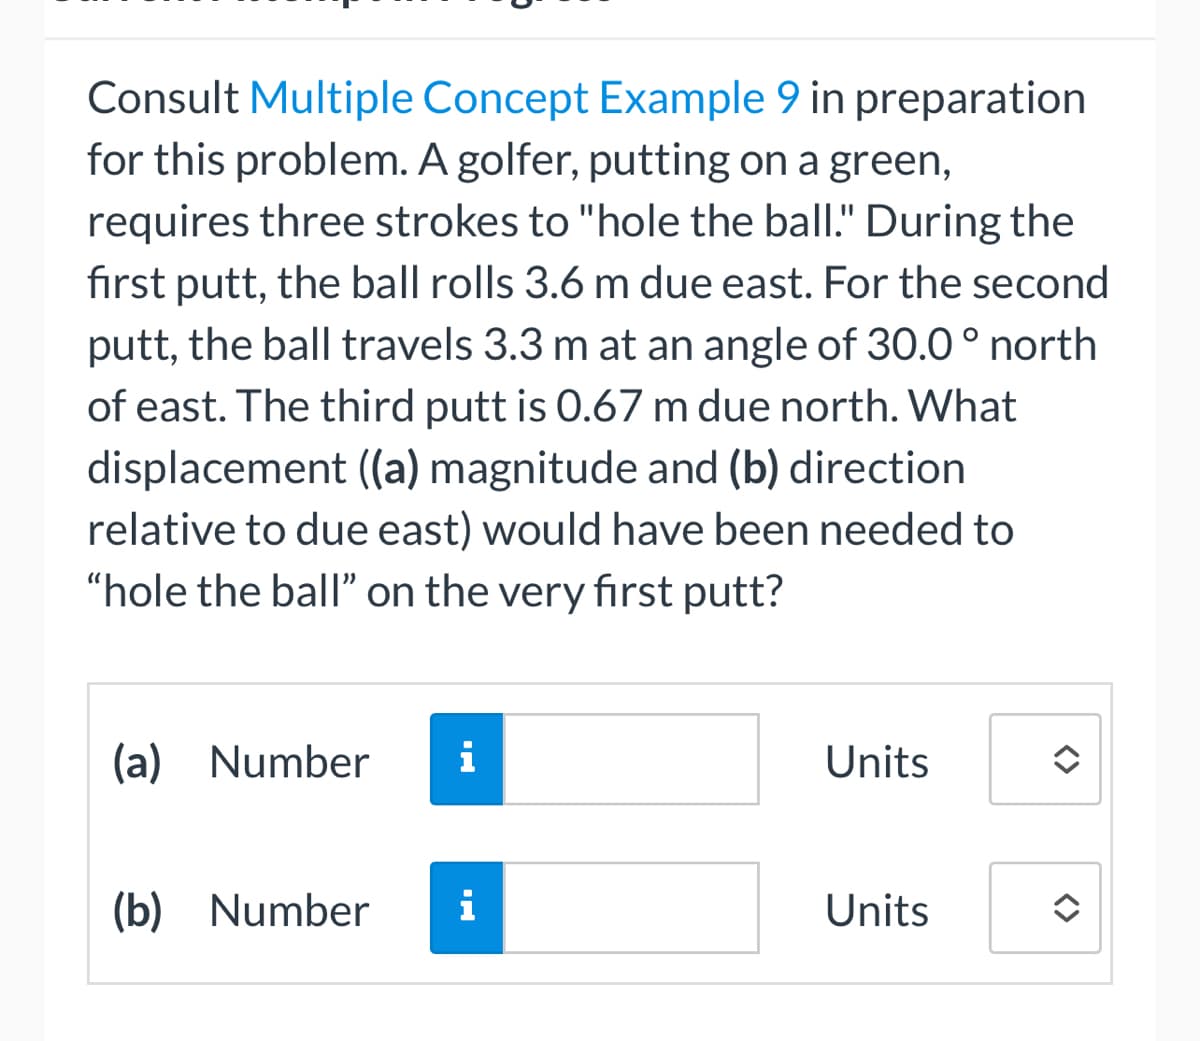 Consult Multiple Concept Example 9 in preparation
for this problem. A golfer, putting on a green,
requires three strokes to "hole the ball." During the
fırst putt, the ball rolls 3.6 m due east. For the second
putt, the ball travels 3.3 m at an angle of 30.0 ° north
of east. The third putt is 0.67 m due north. What
displacement (a) magnitude and (b) direction
relative to due east) would have been needed to
"hole the ball" on the very first putt?
(a) Number
i
Units
(b) Number
i
Units
<>
<>
